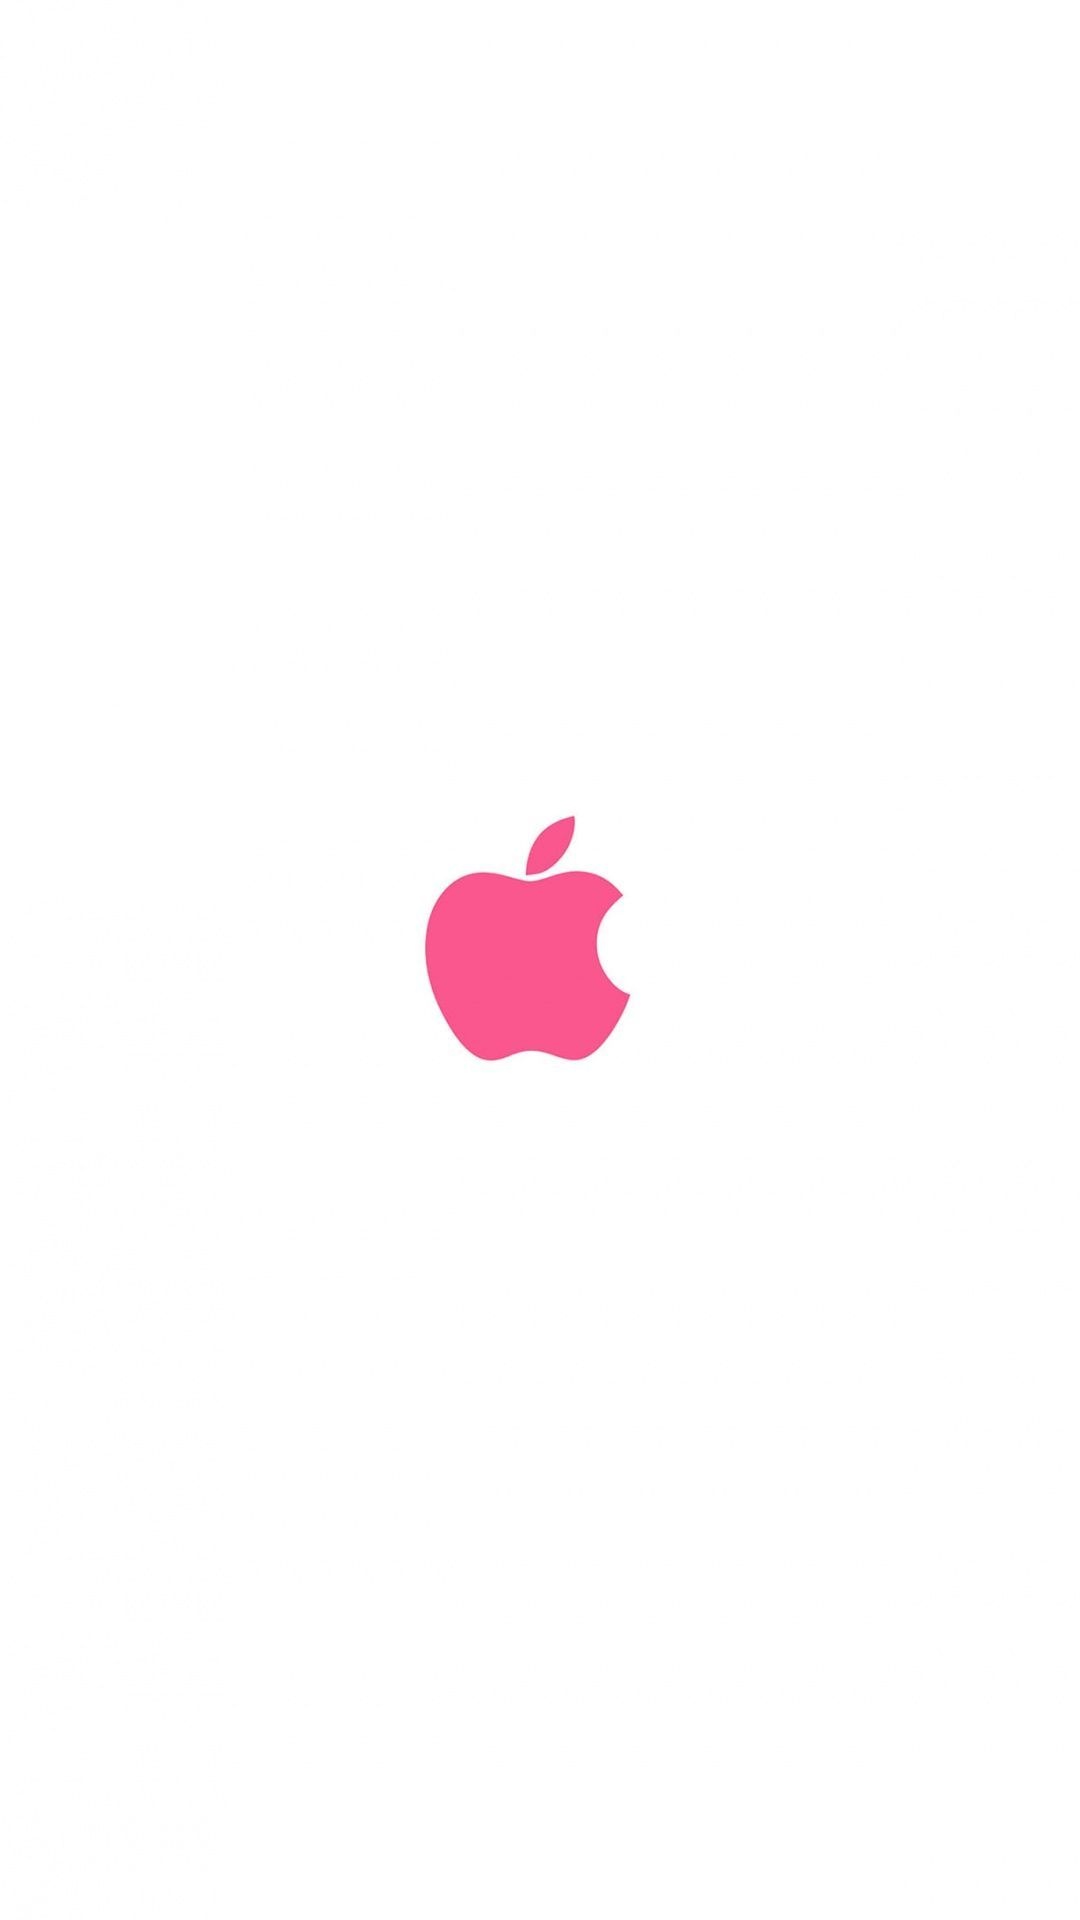 iMac Logo, Pink Apple logo wallpapers, Playful and vibrant, Expressive and unique, 1080x1920 Full HD Handy